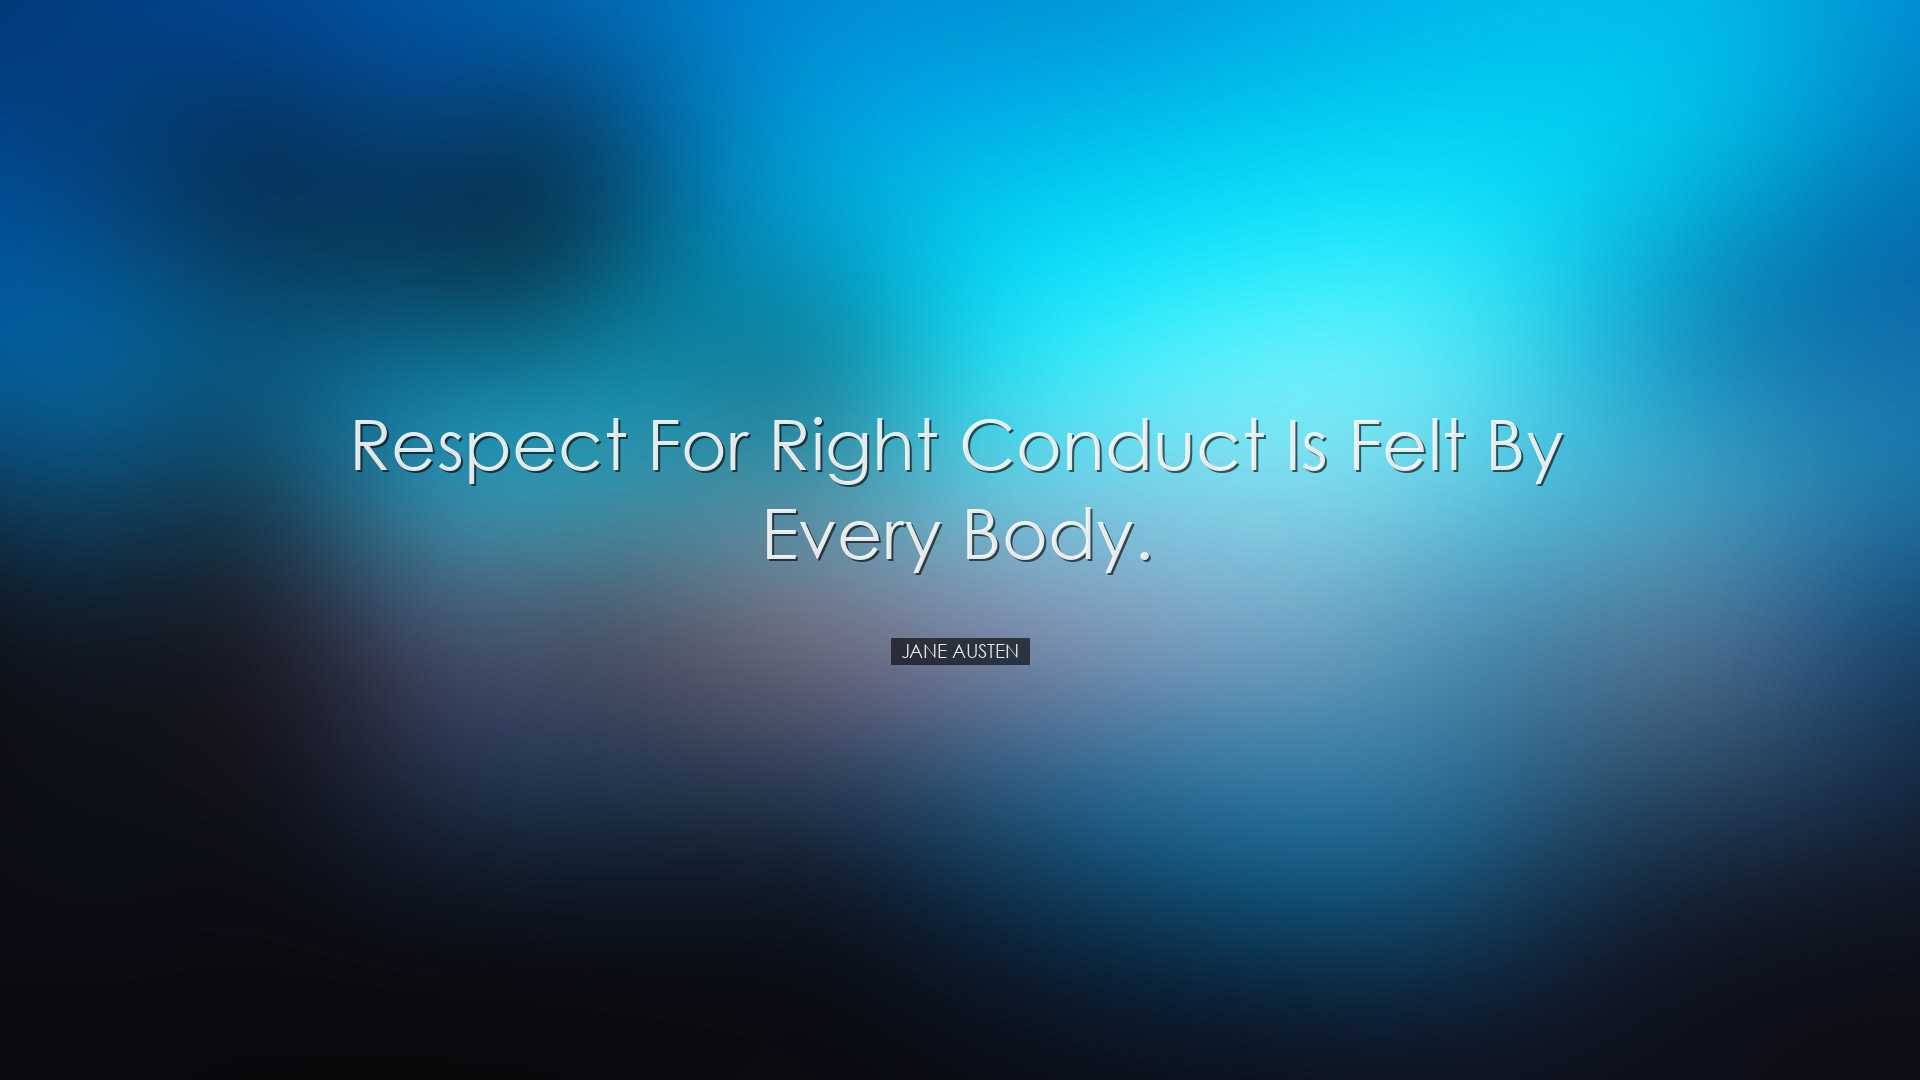 Respect for right conduct is felt by every body. - Jane Austen